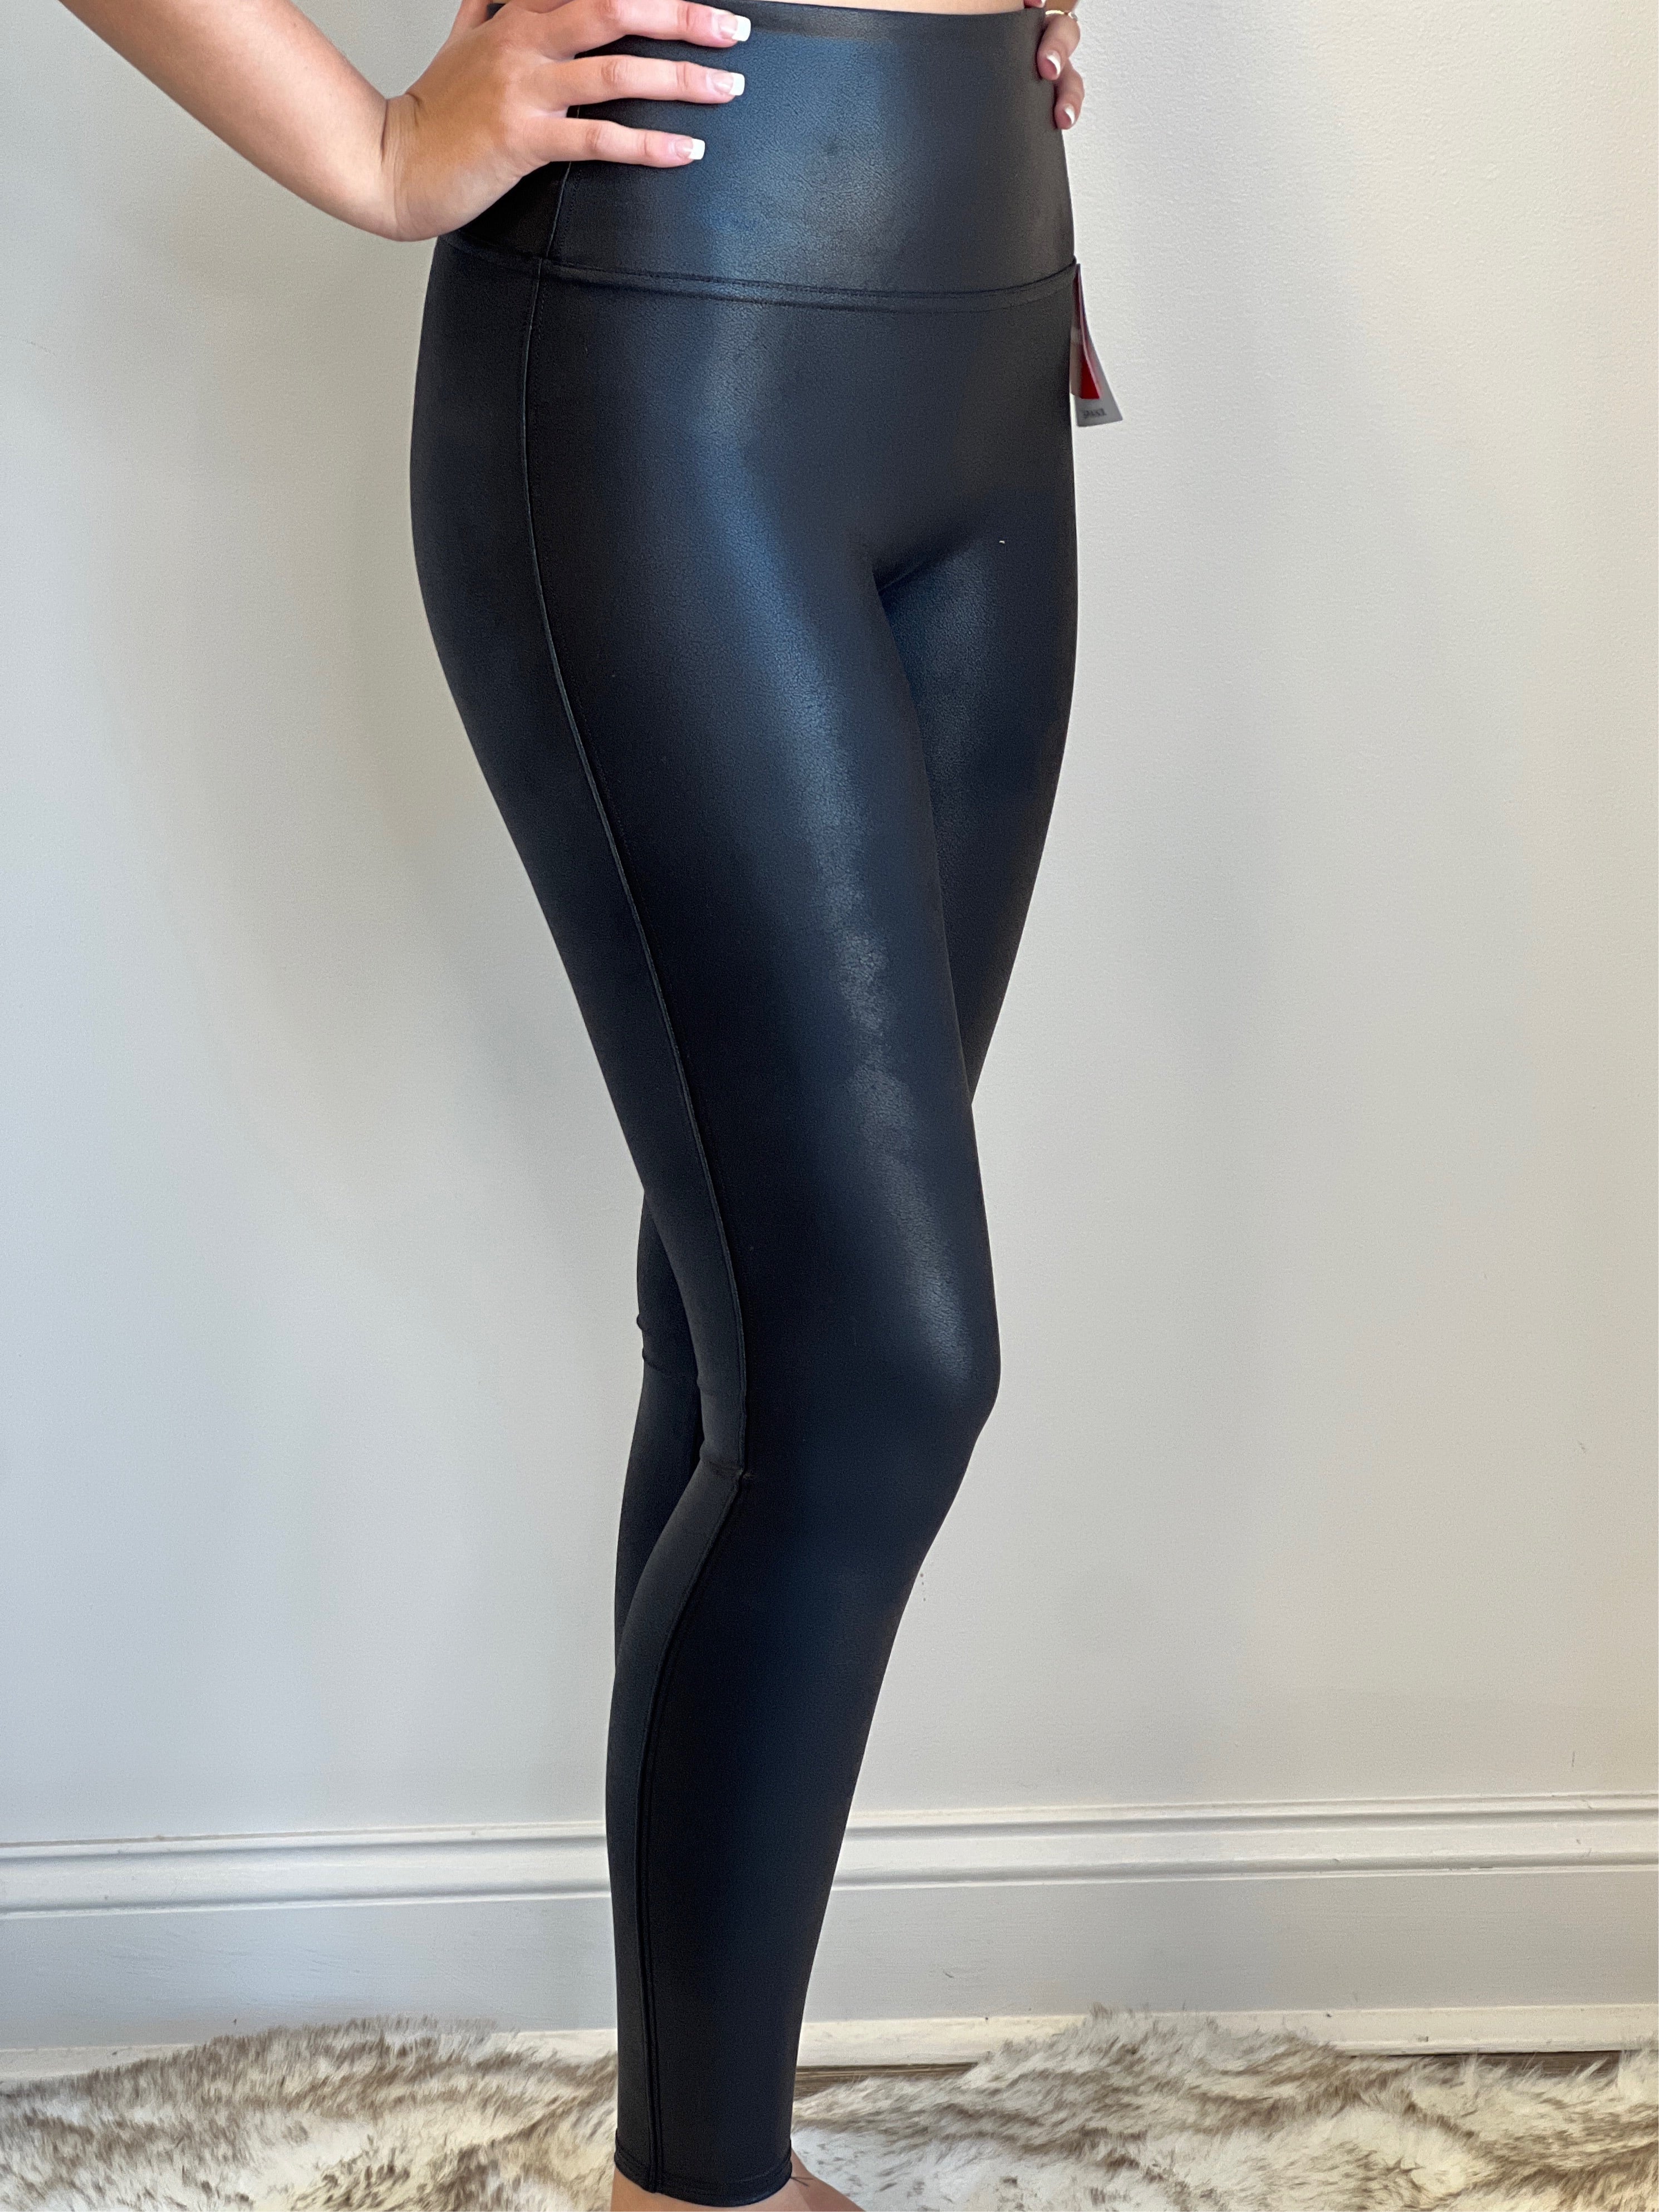 SPANX, Pants & Jumpsuits, Spanx Faux Leather Leggings Small